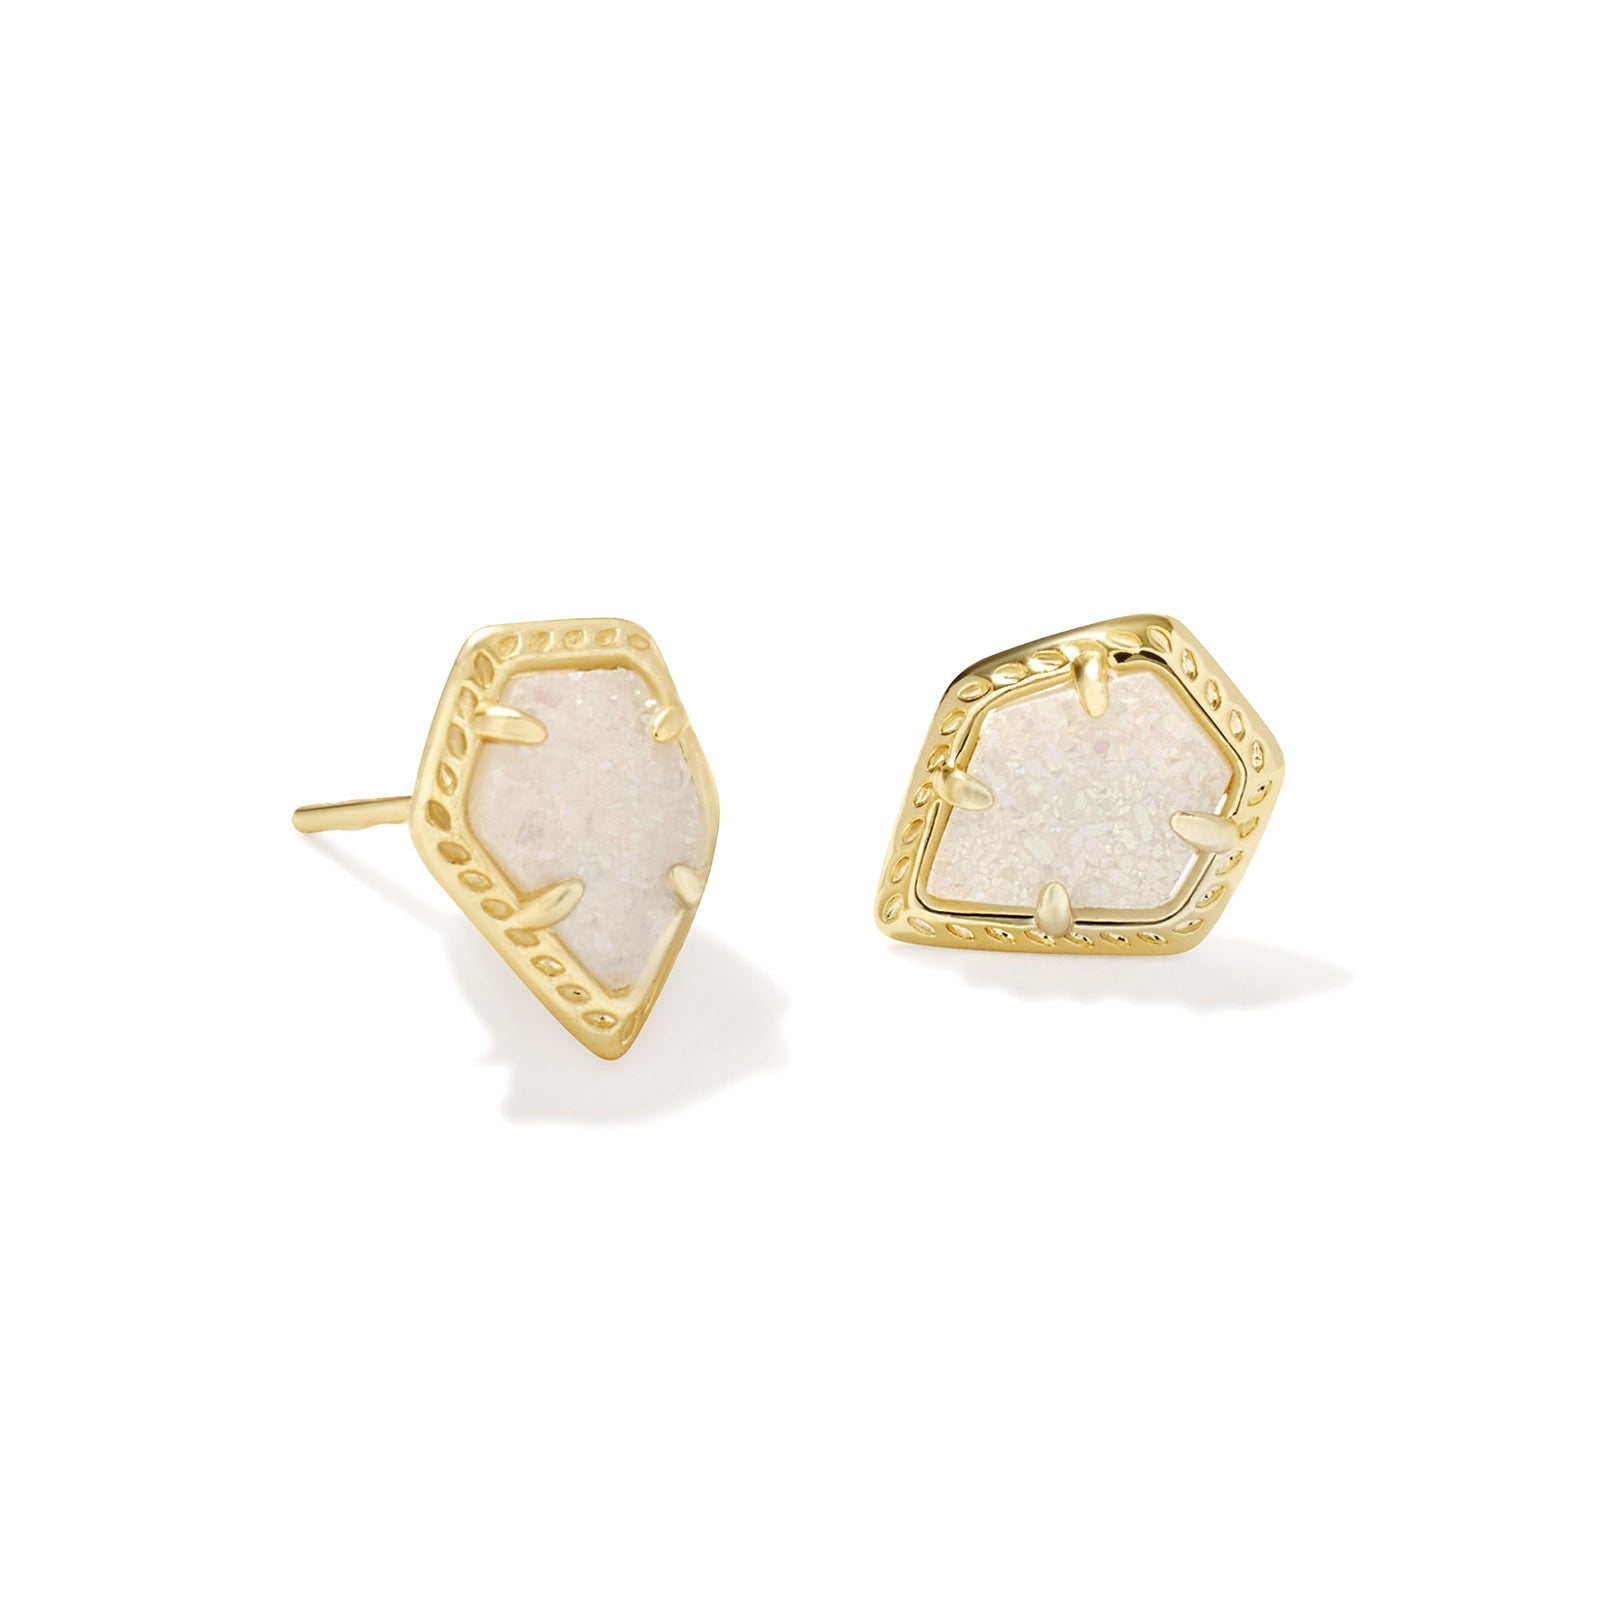 Kendra Scott | Framed Tessa Gold Stud Earrings in Iridescent Drusy - Giddy Up Glamour Boutique